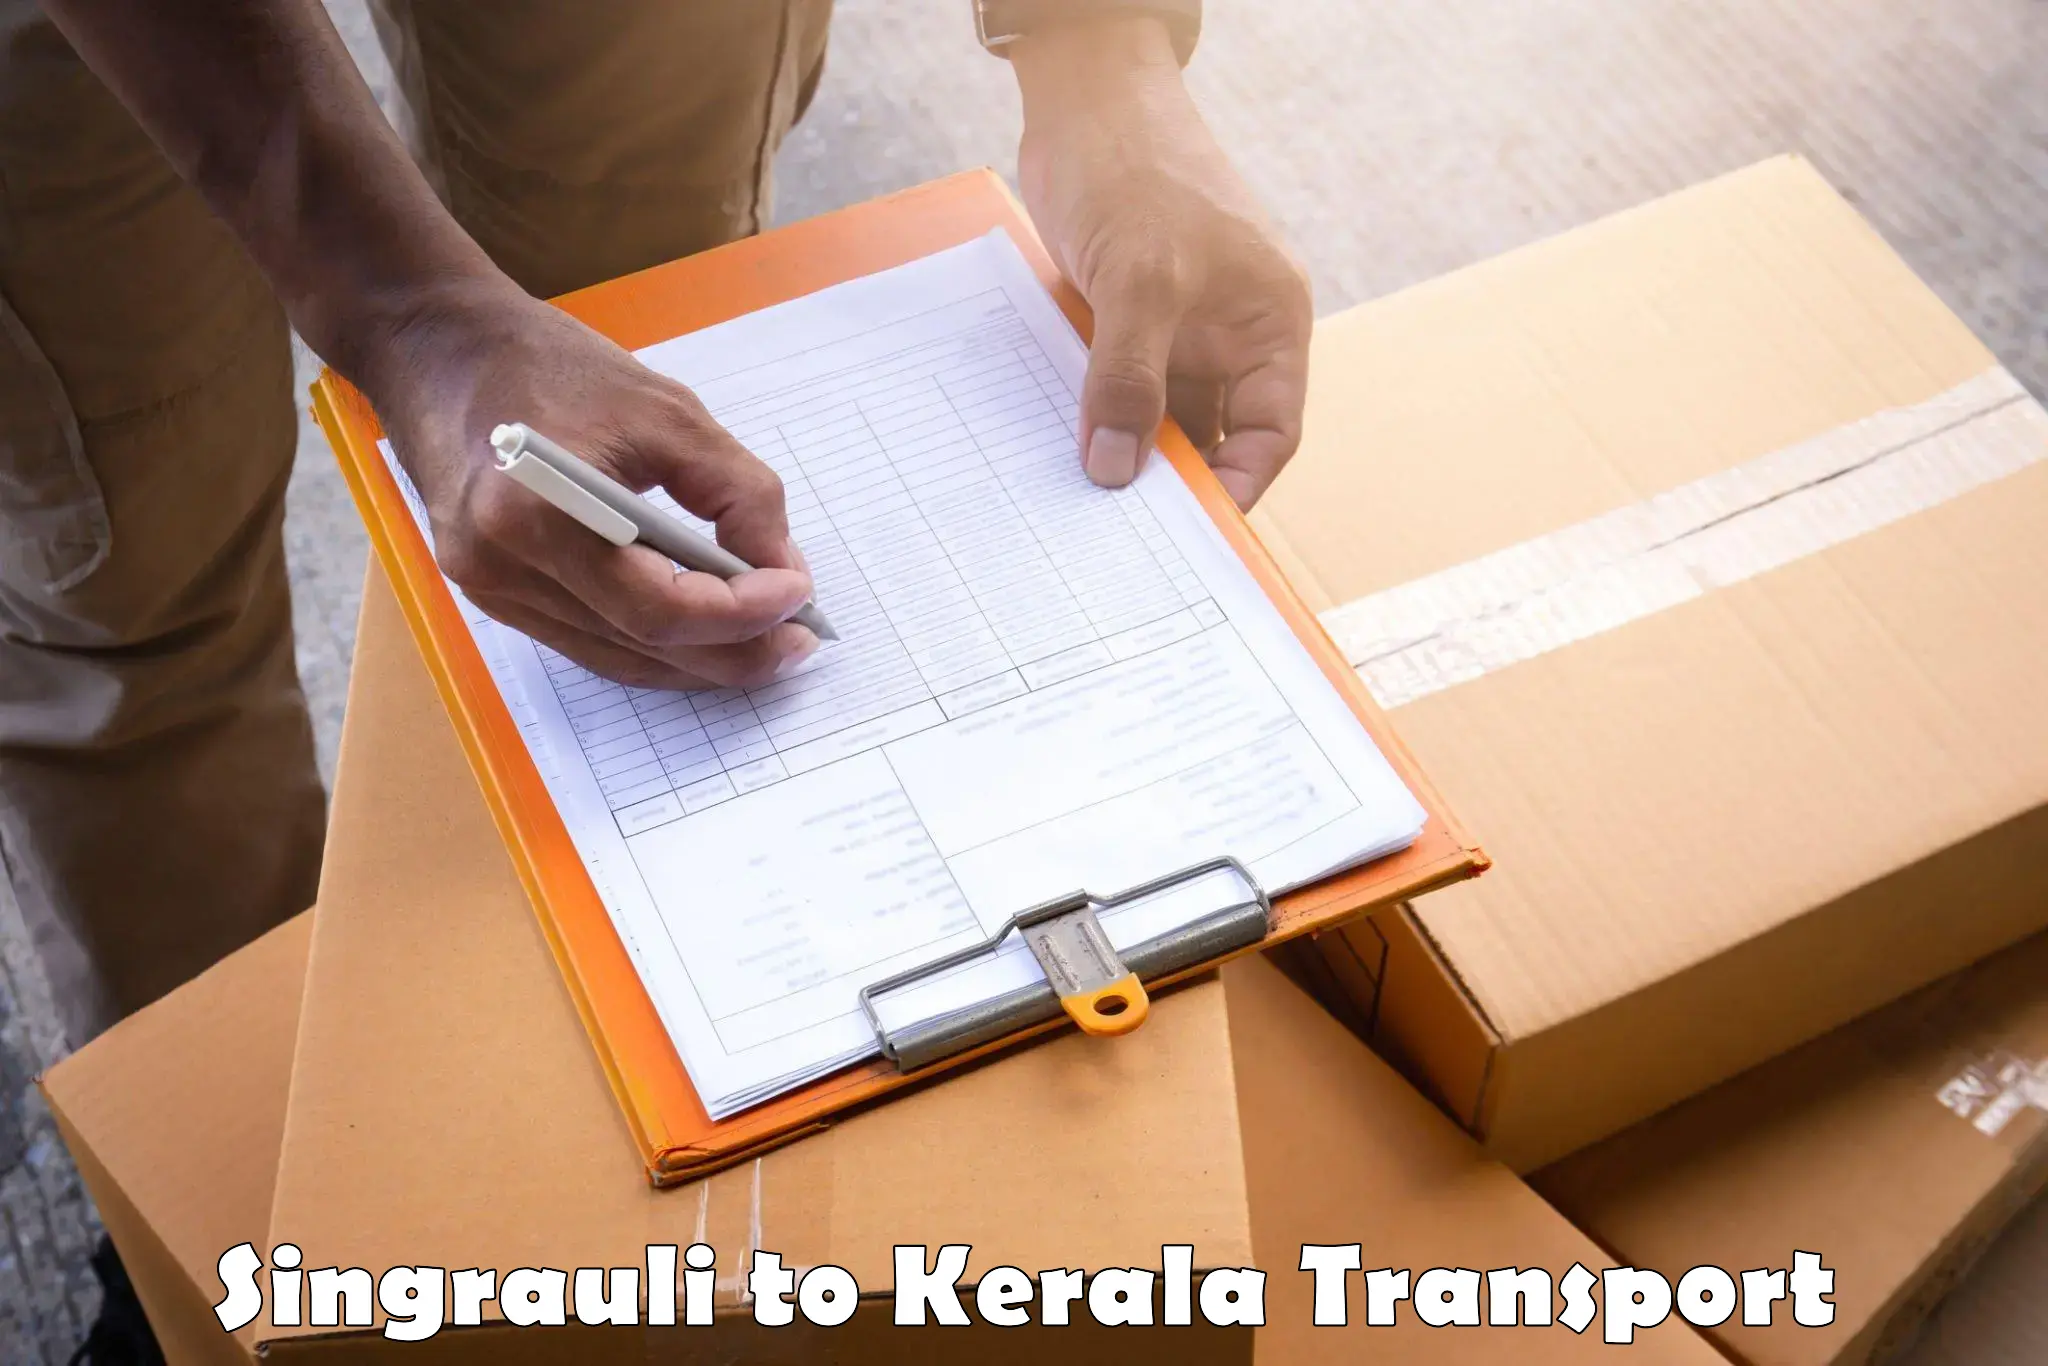 Container transport service Singrauli to Chalakudy